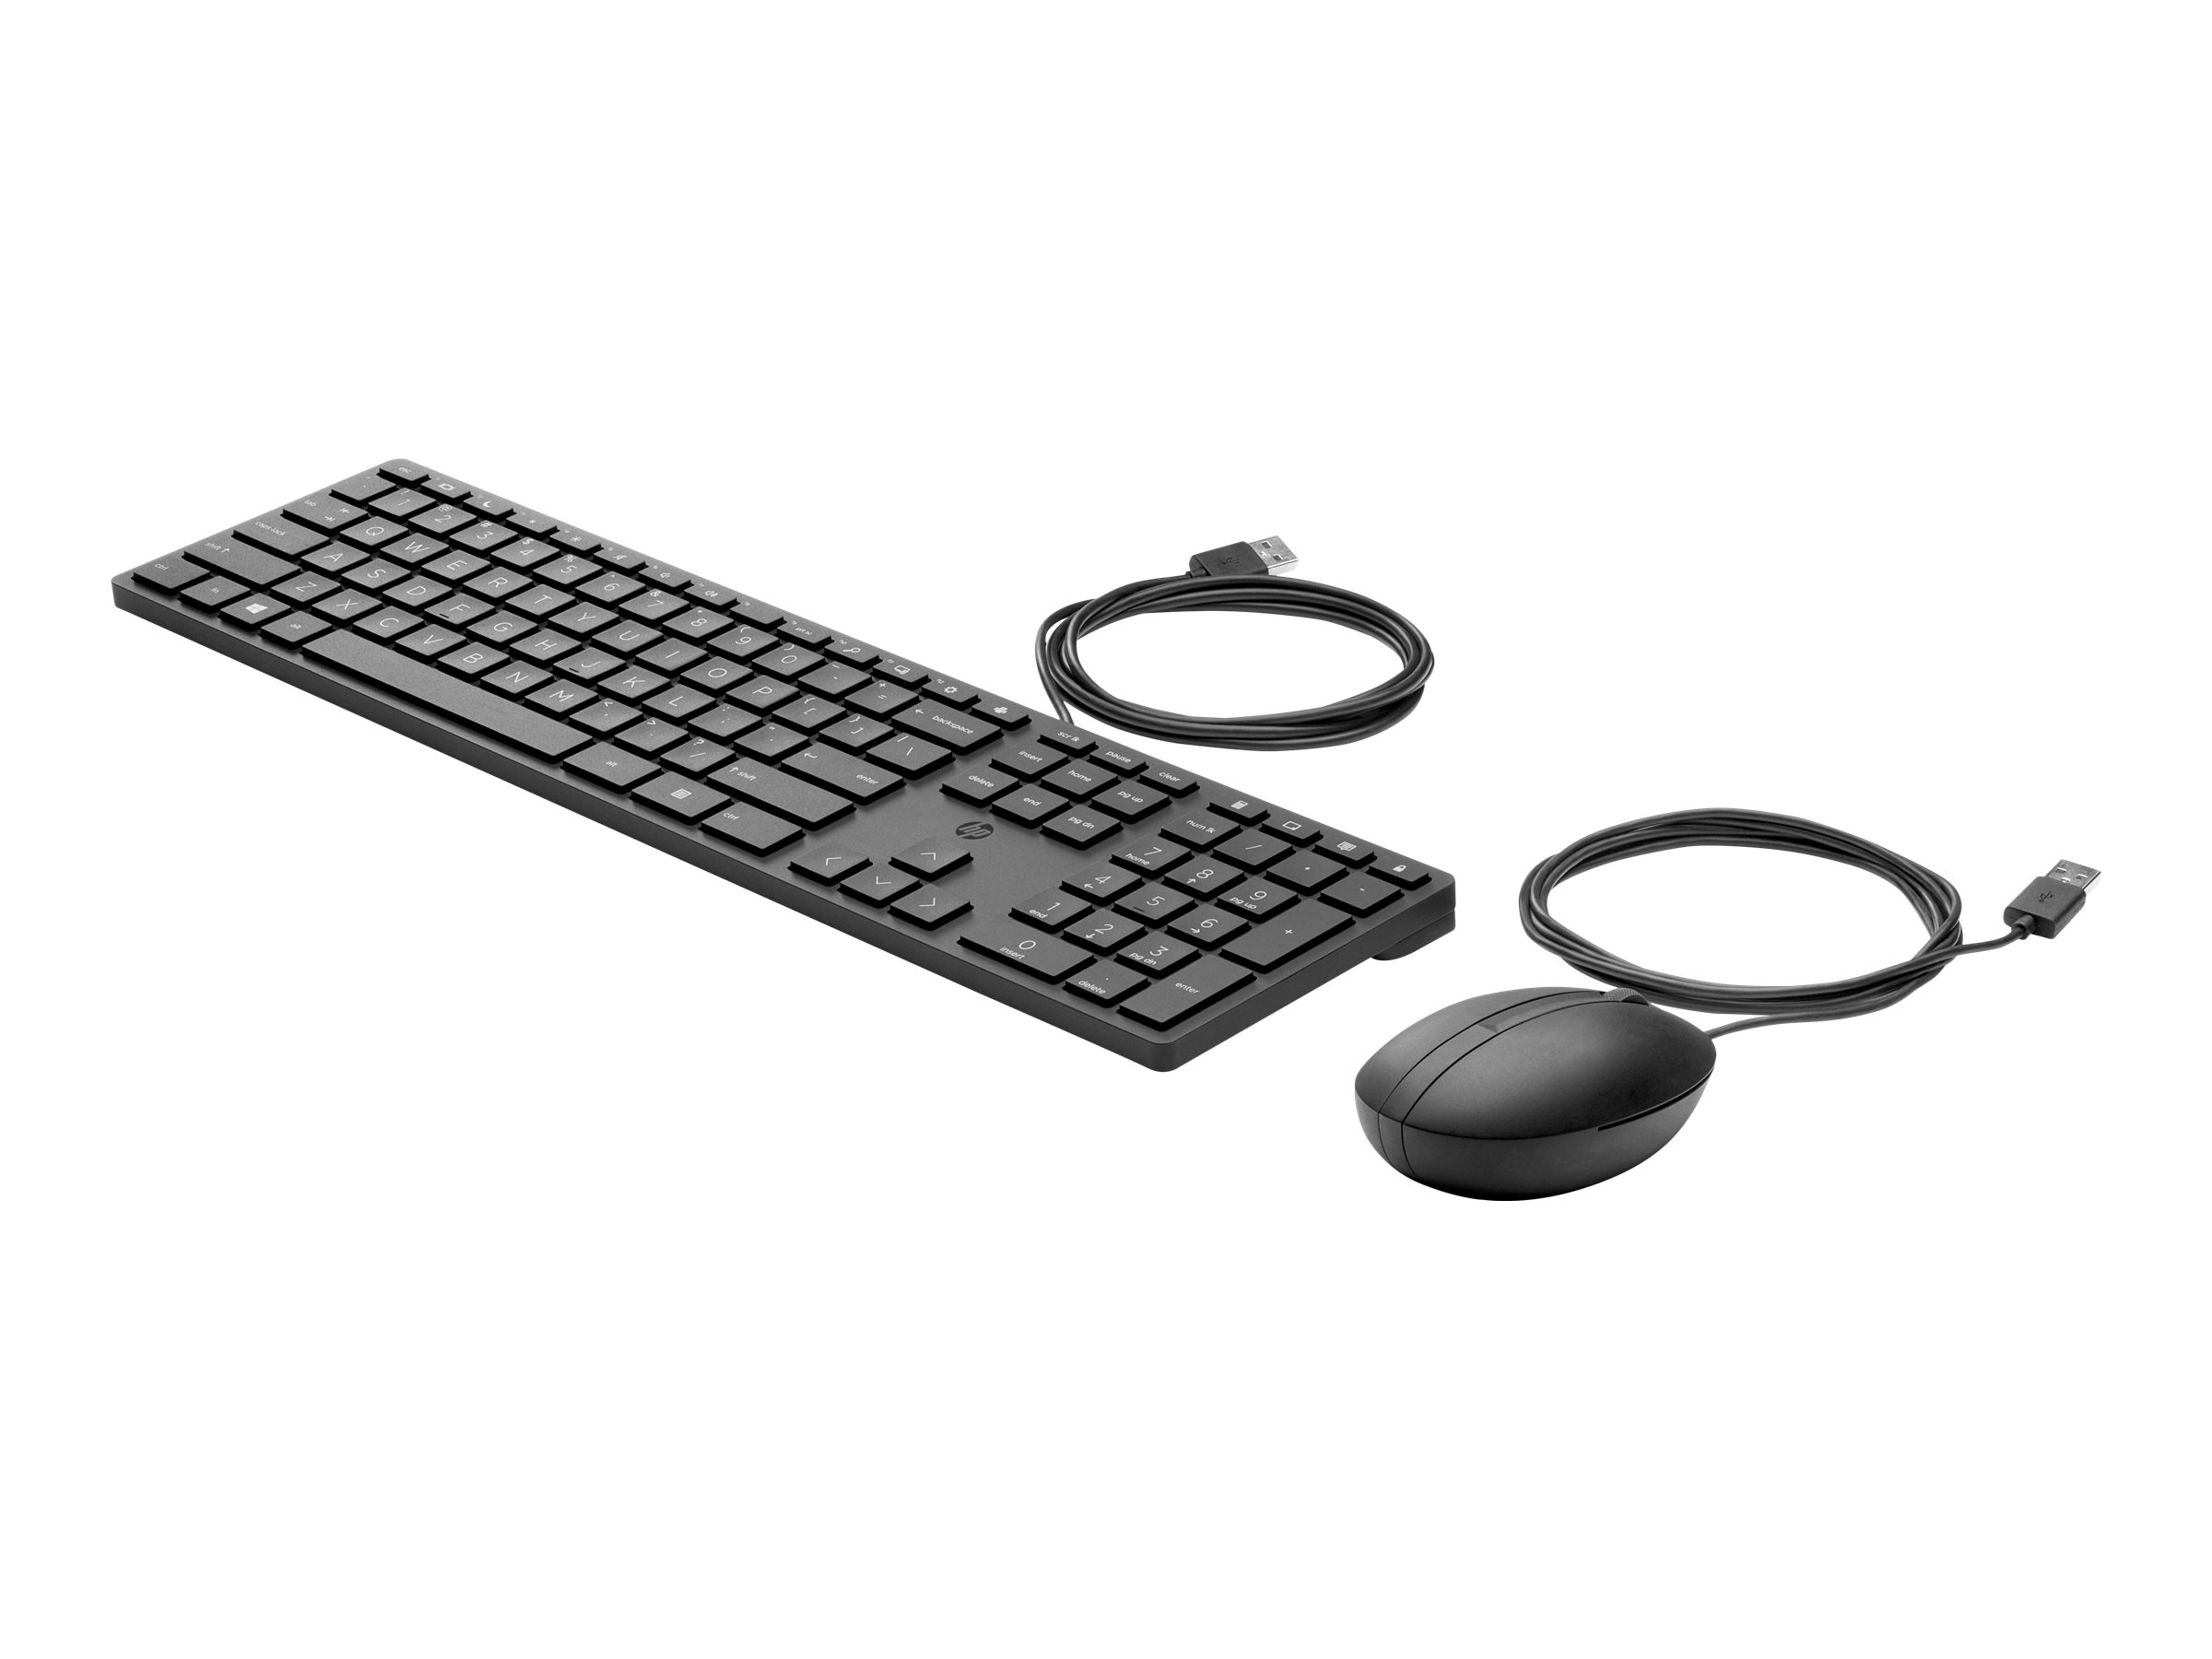 HP USB 320K Keyboard and 320M Mouse Combo